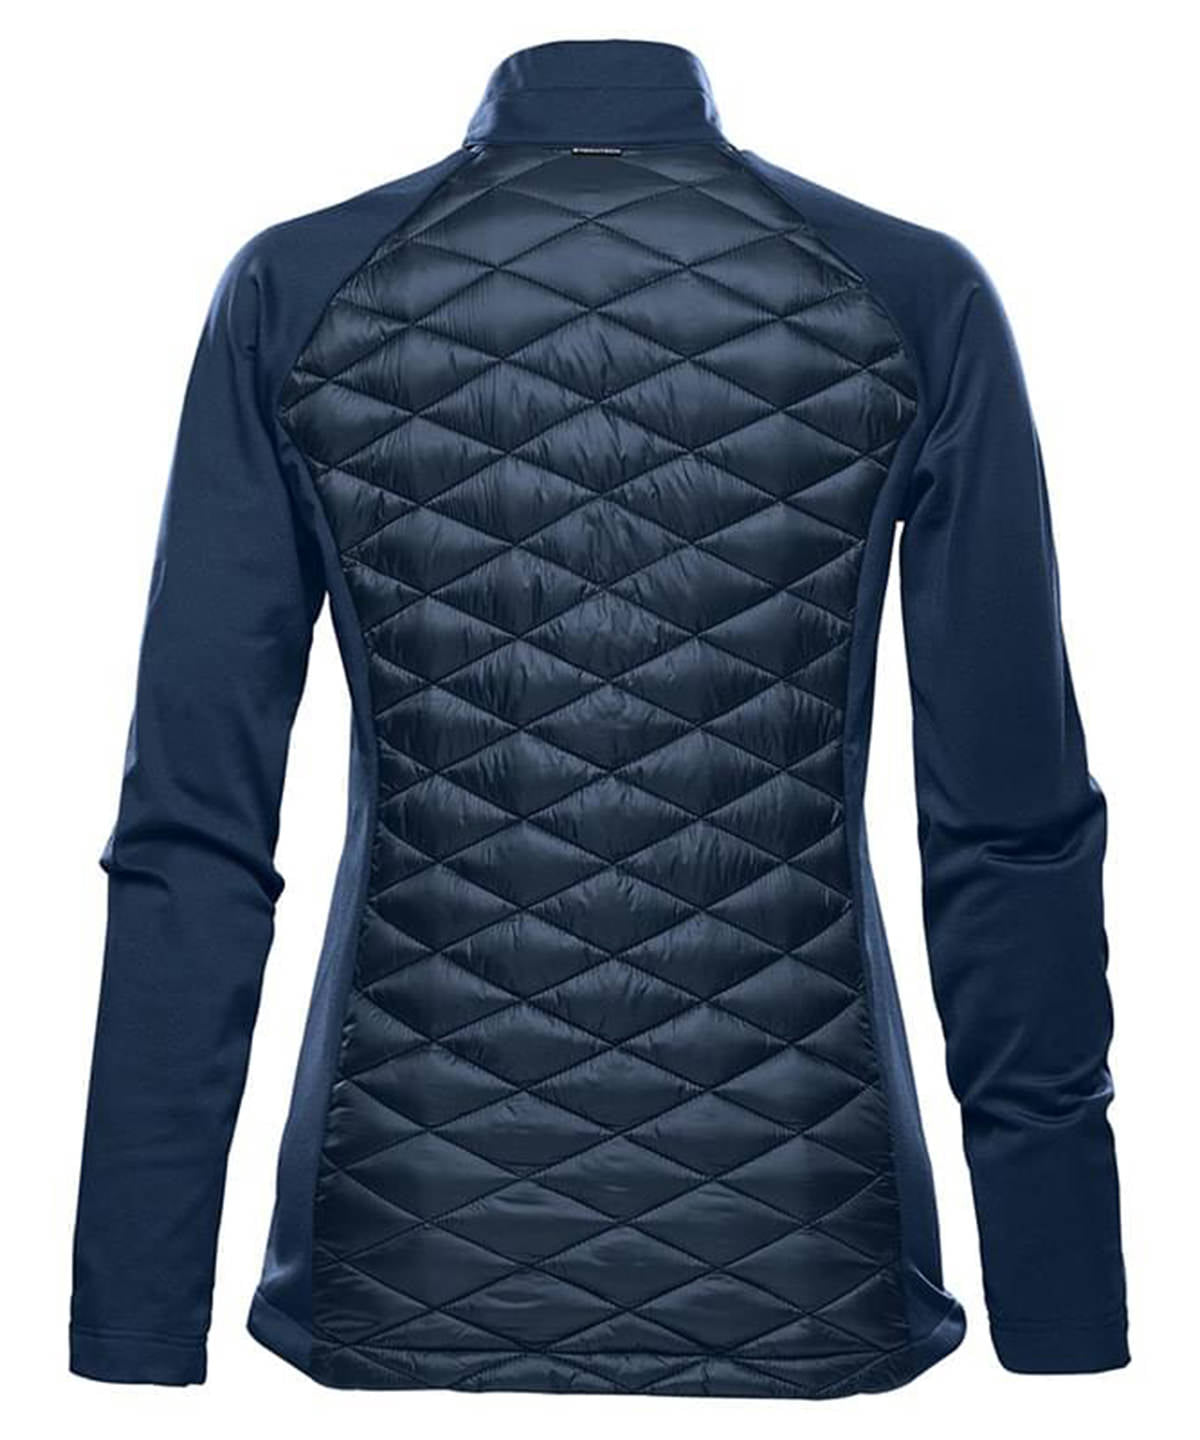 Women’s Boulder thermal shell